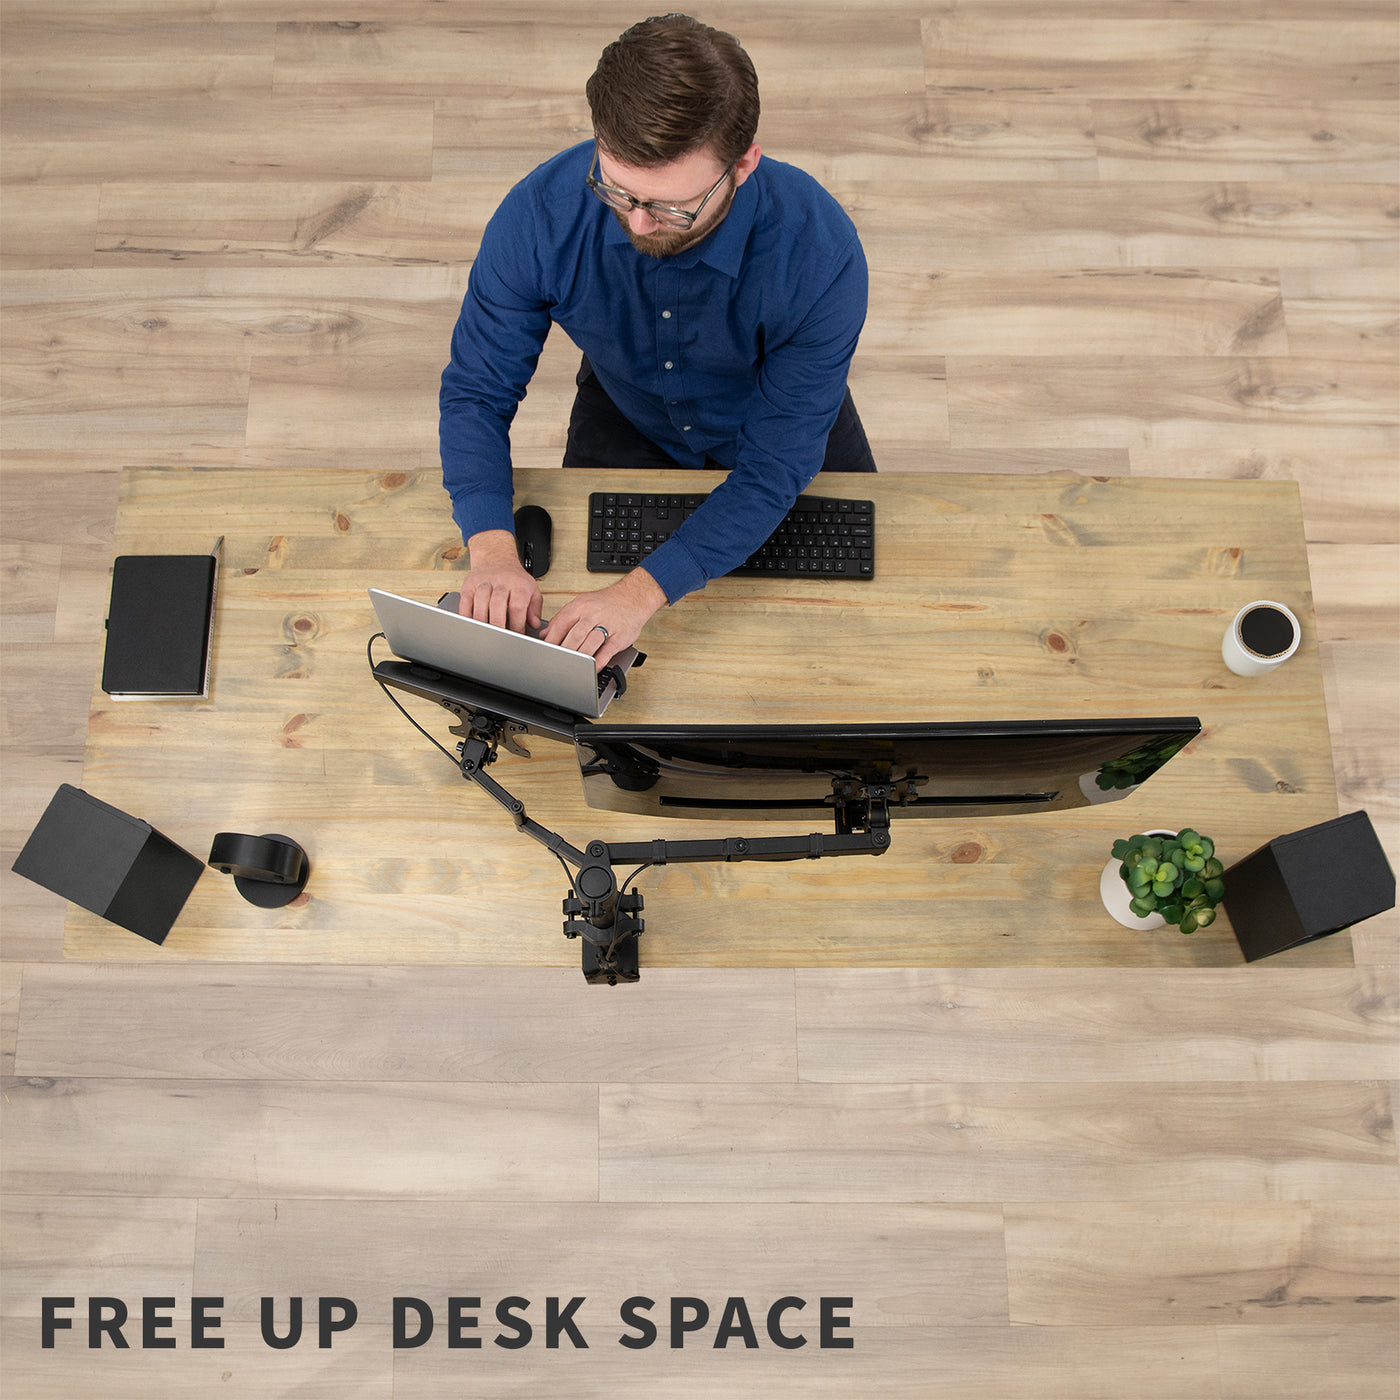 Free up surface-level desk space by elevating your laptop to ergonomic heights with your monitor.